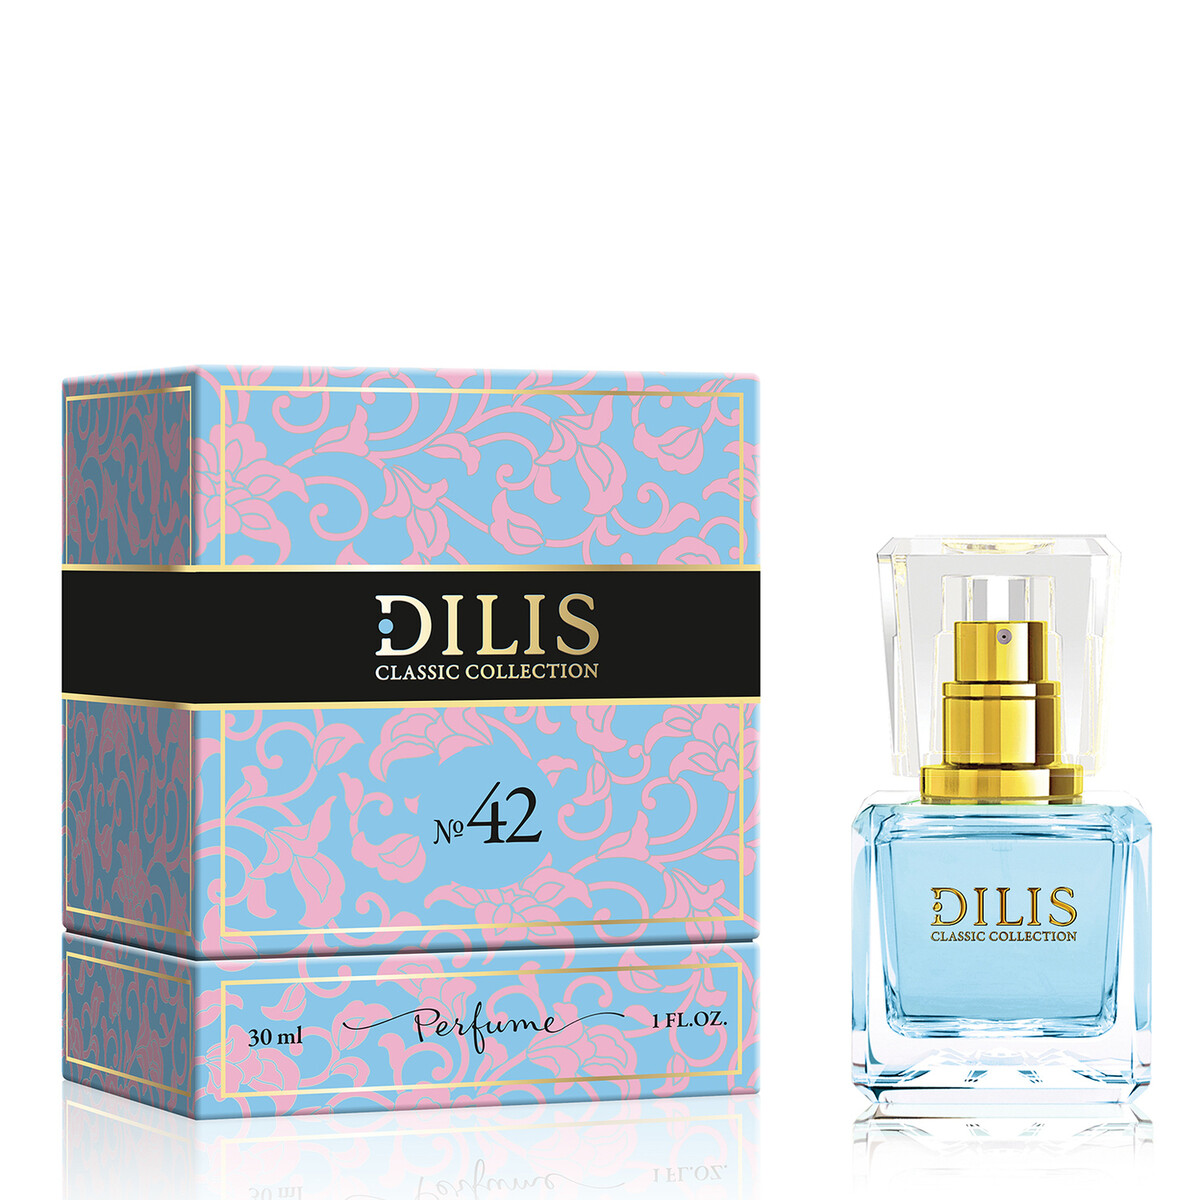    dilis classic collection